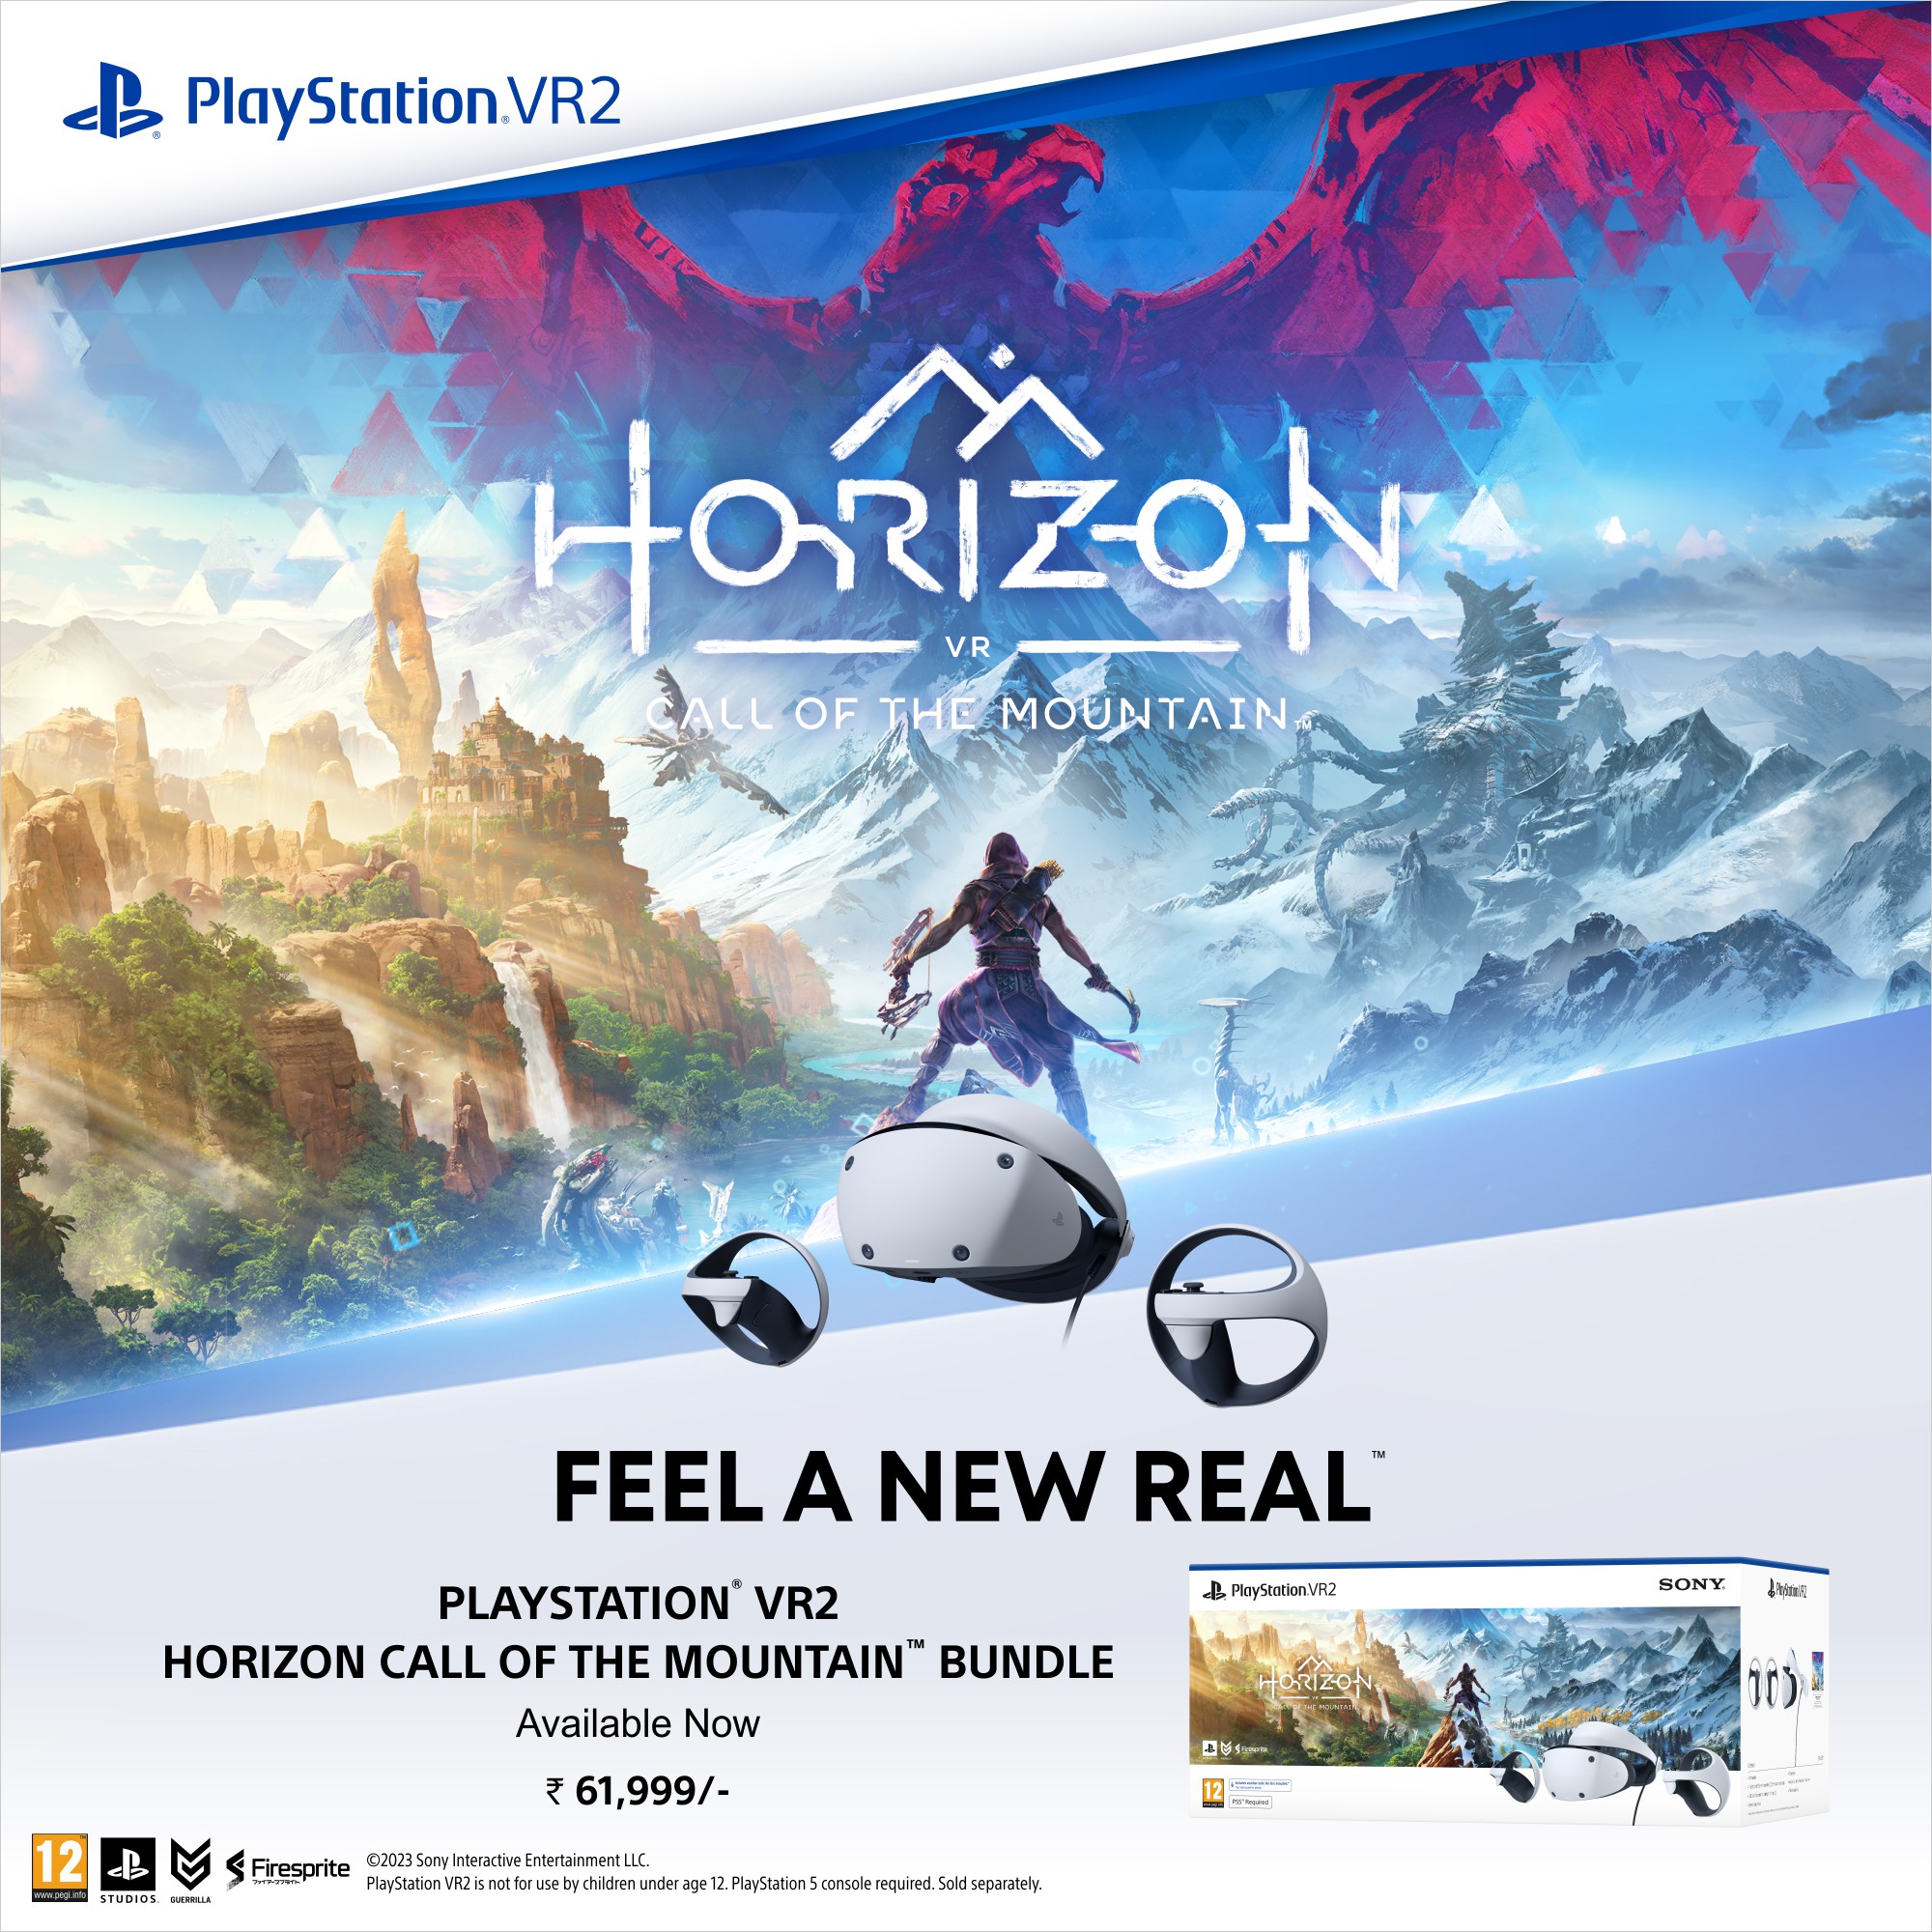 PlayStation VR 2 Deals: Save With Horizon Call of the Mountain